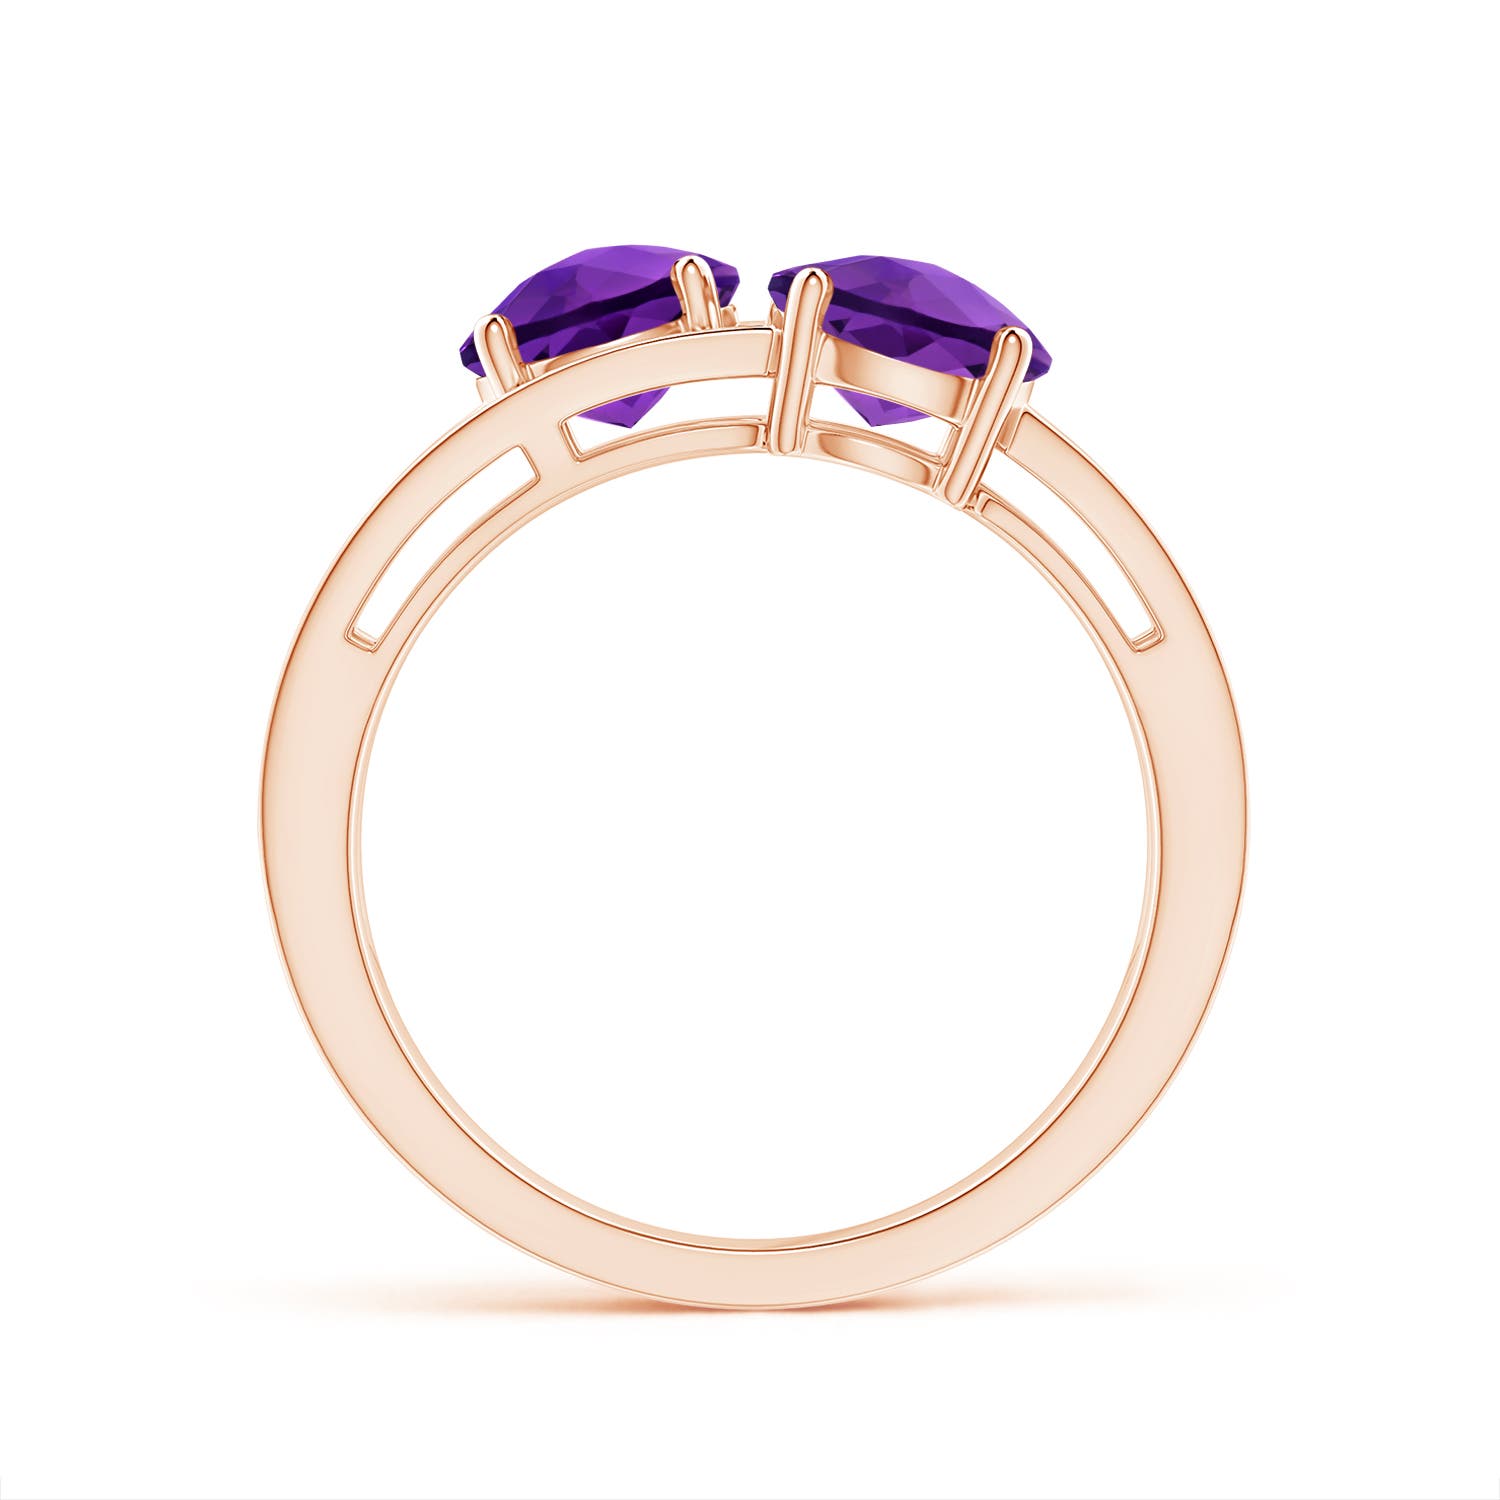 AAA - Amethyst / 2.76 CT / 14 KT Rose Gold